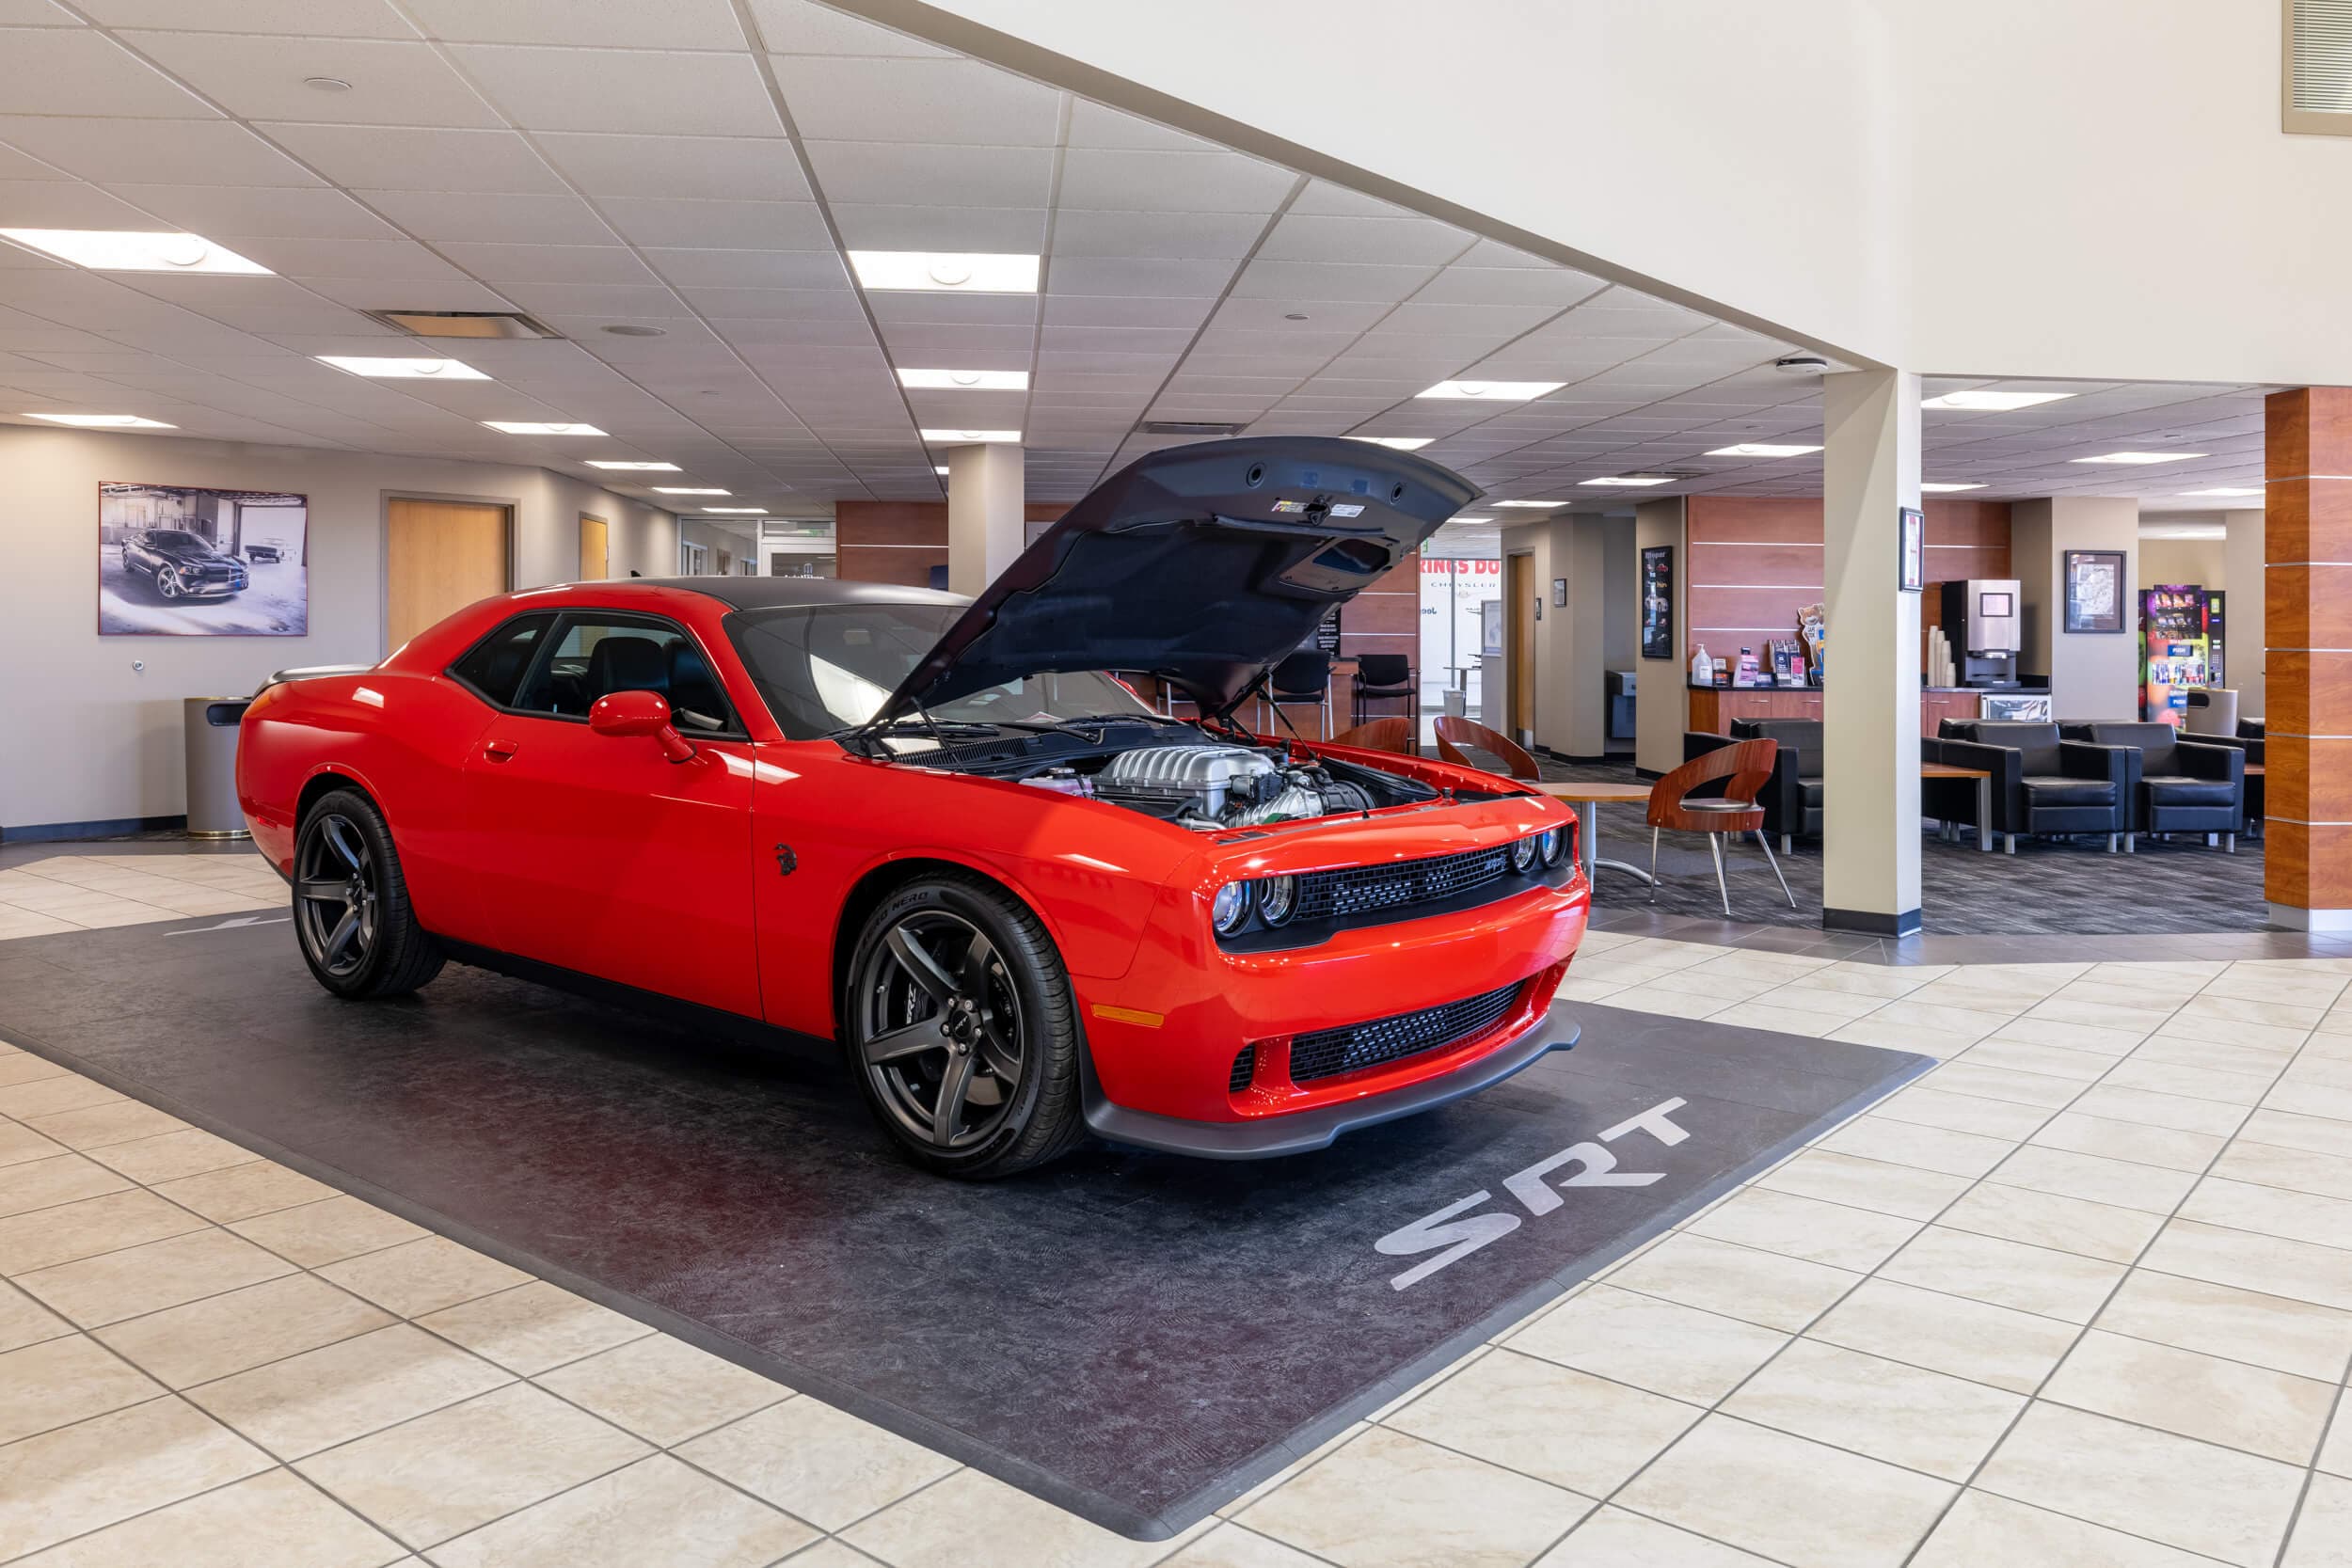 Interior of AutoNation Dodge Ram Colorado Springs in a space displaying a red Dodge SRT with its hood open, and some tables and chairs in the background